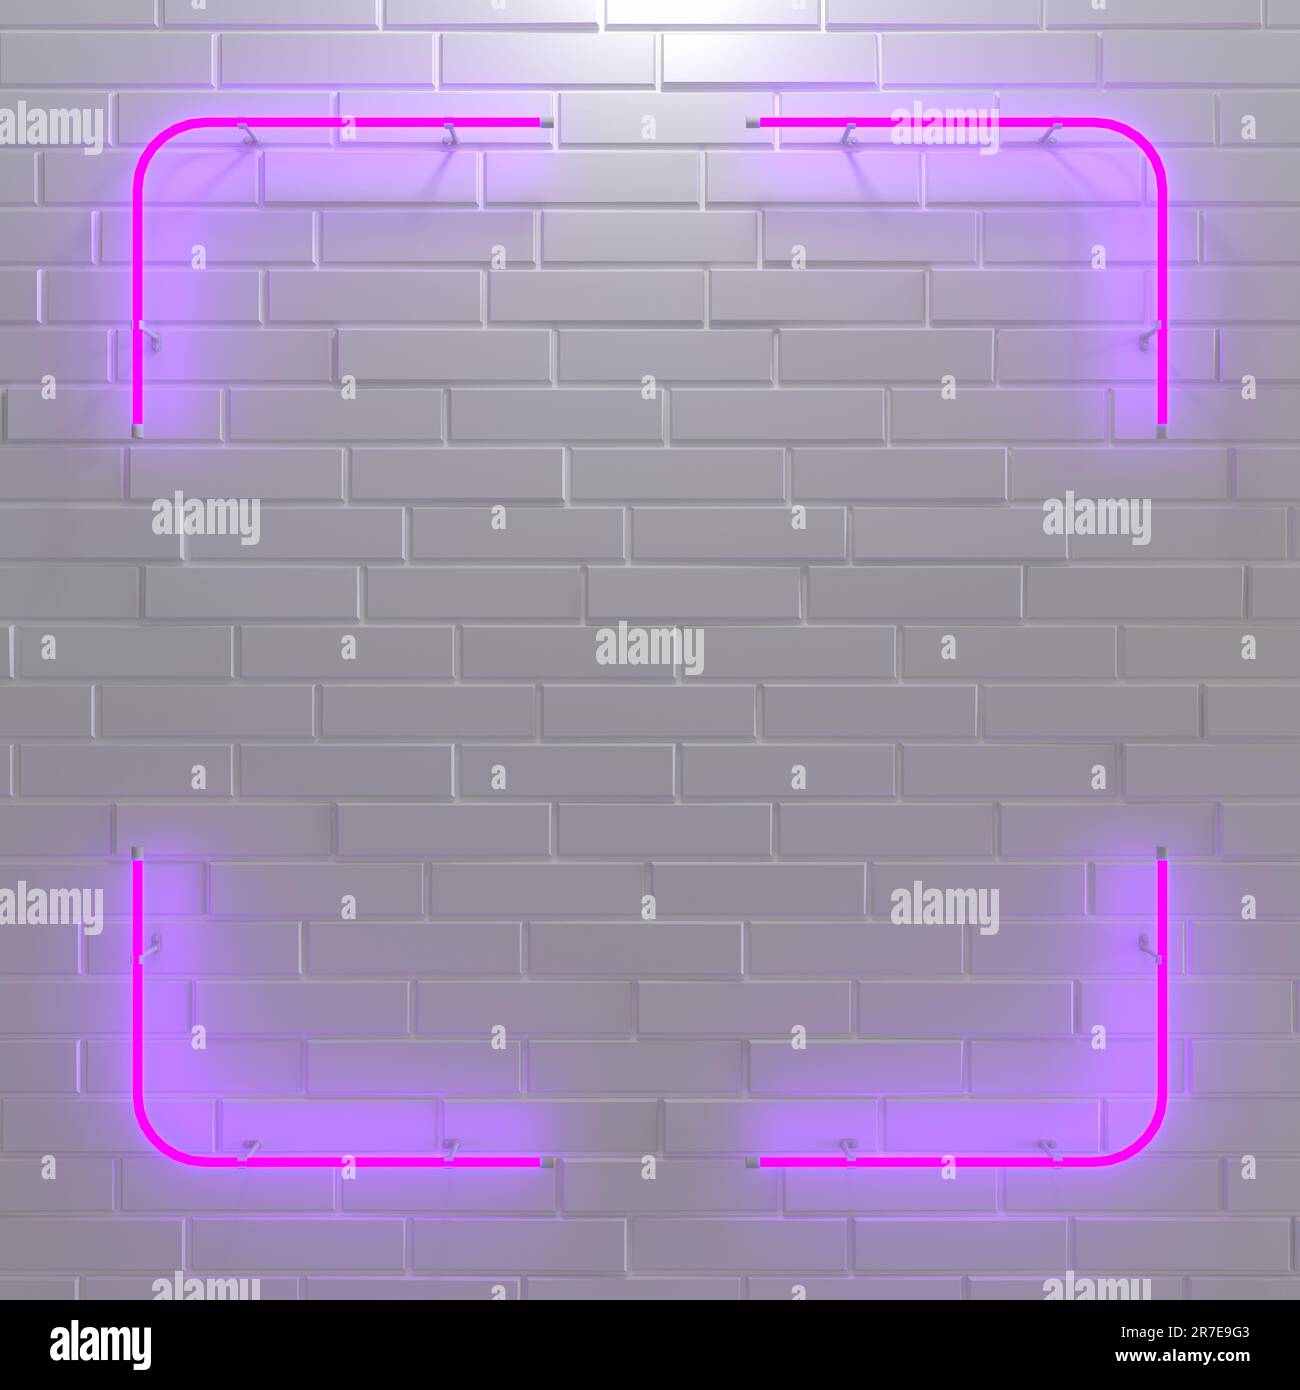 Bright glowing neon rectangular sign on brick wall background. 3d illustration. Stock Photo